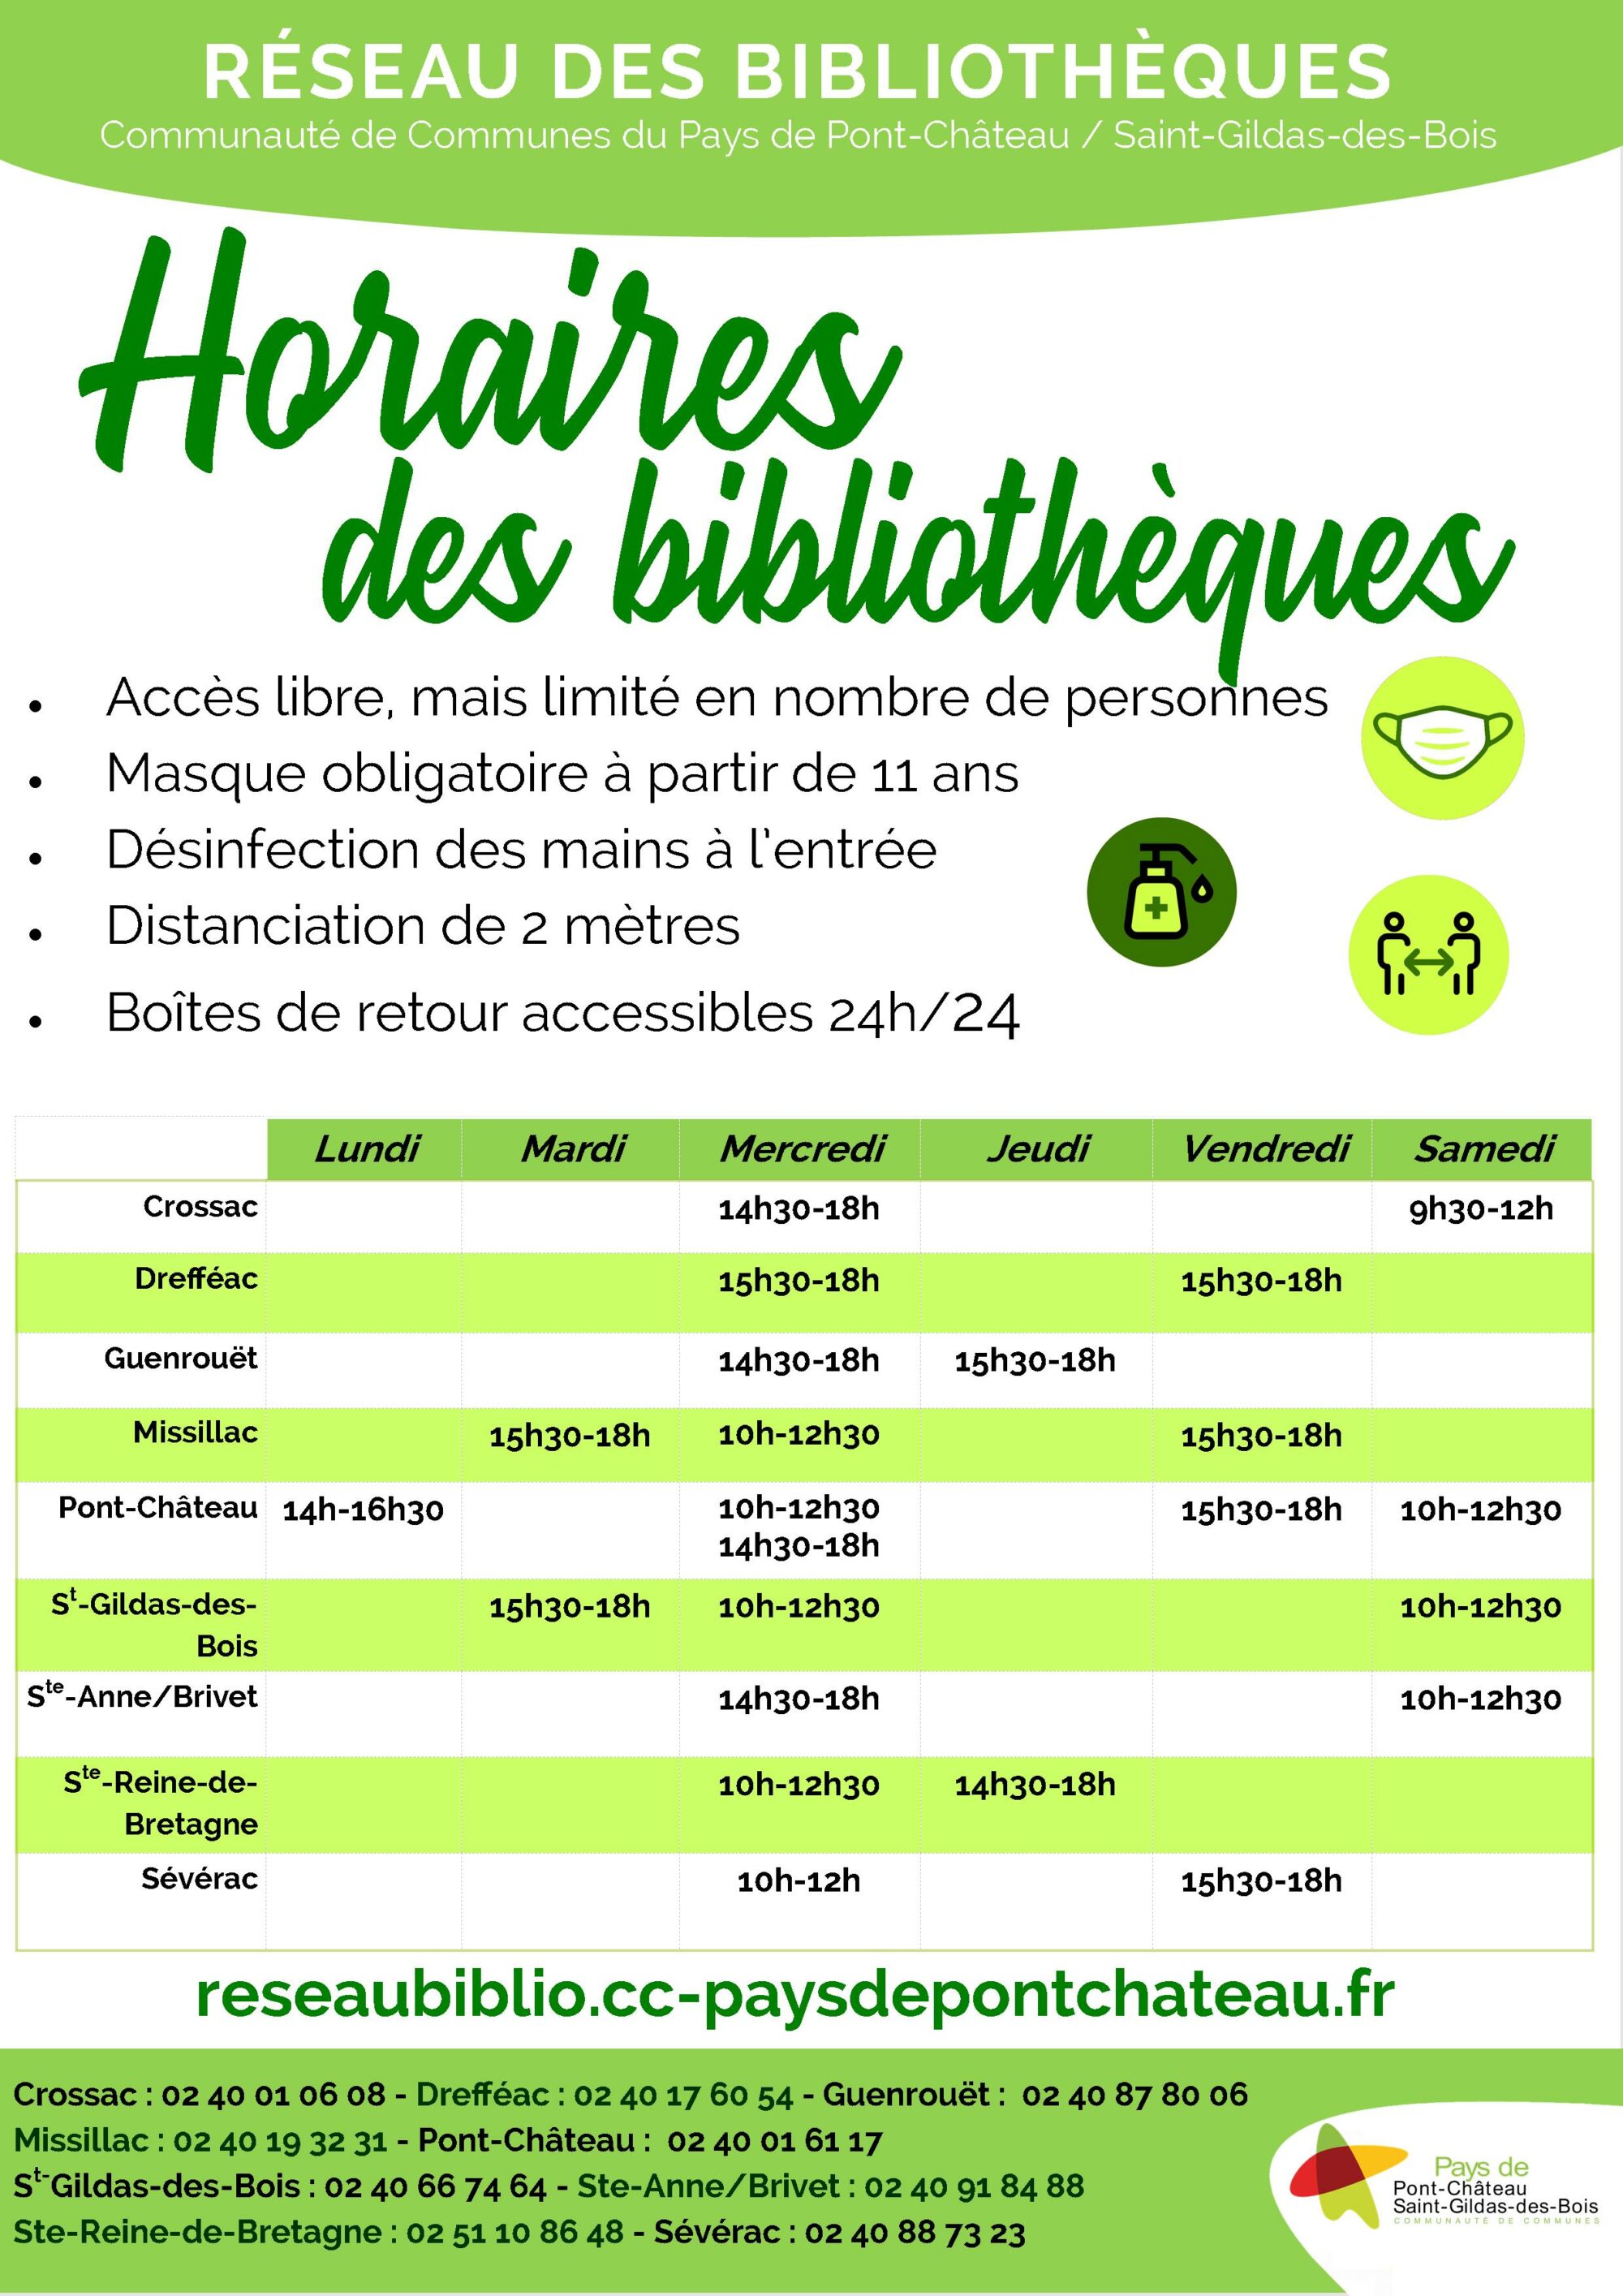 RES_horaires_couvrefeu_19h